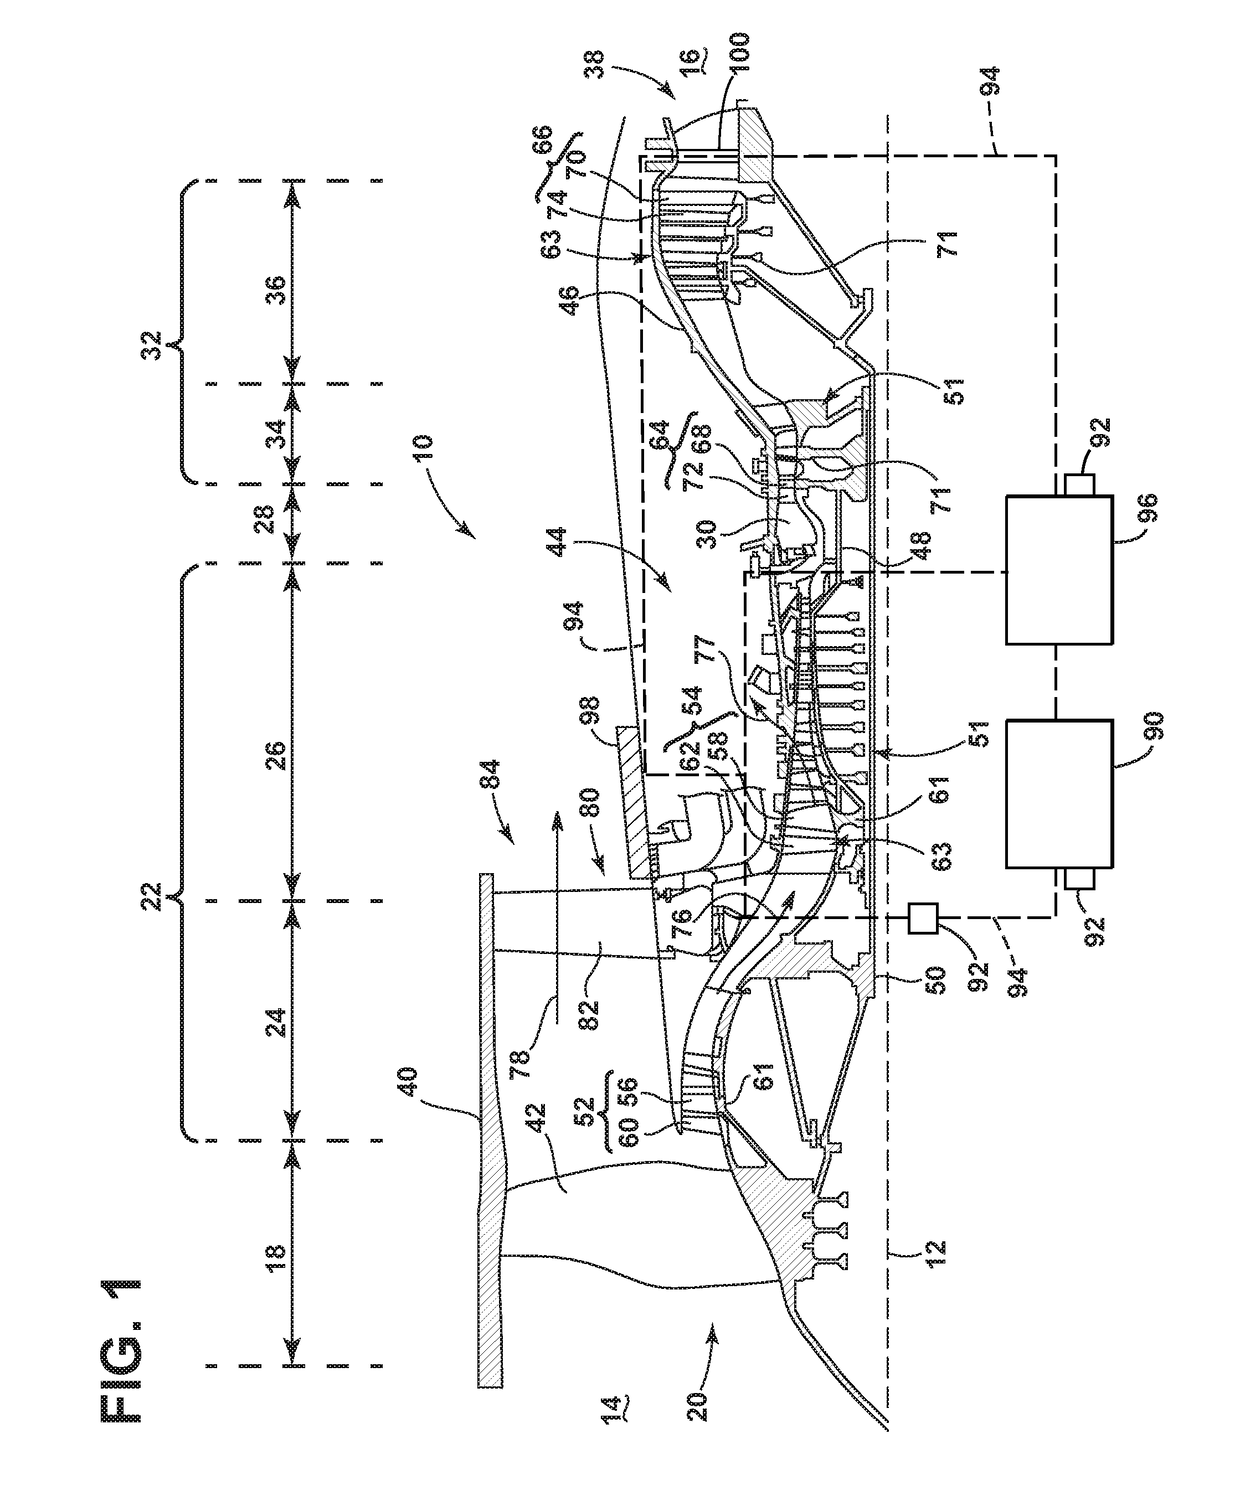 Method and apparatus for determining lubricant contamination or deterioration in an engine